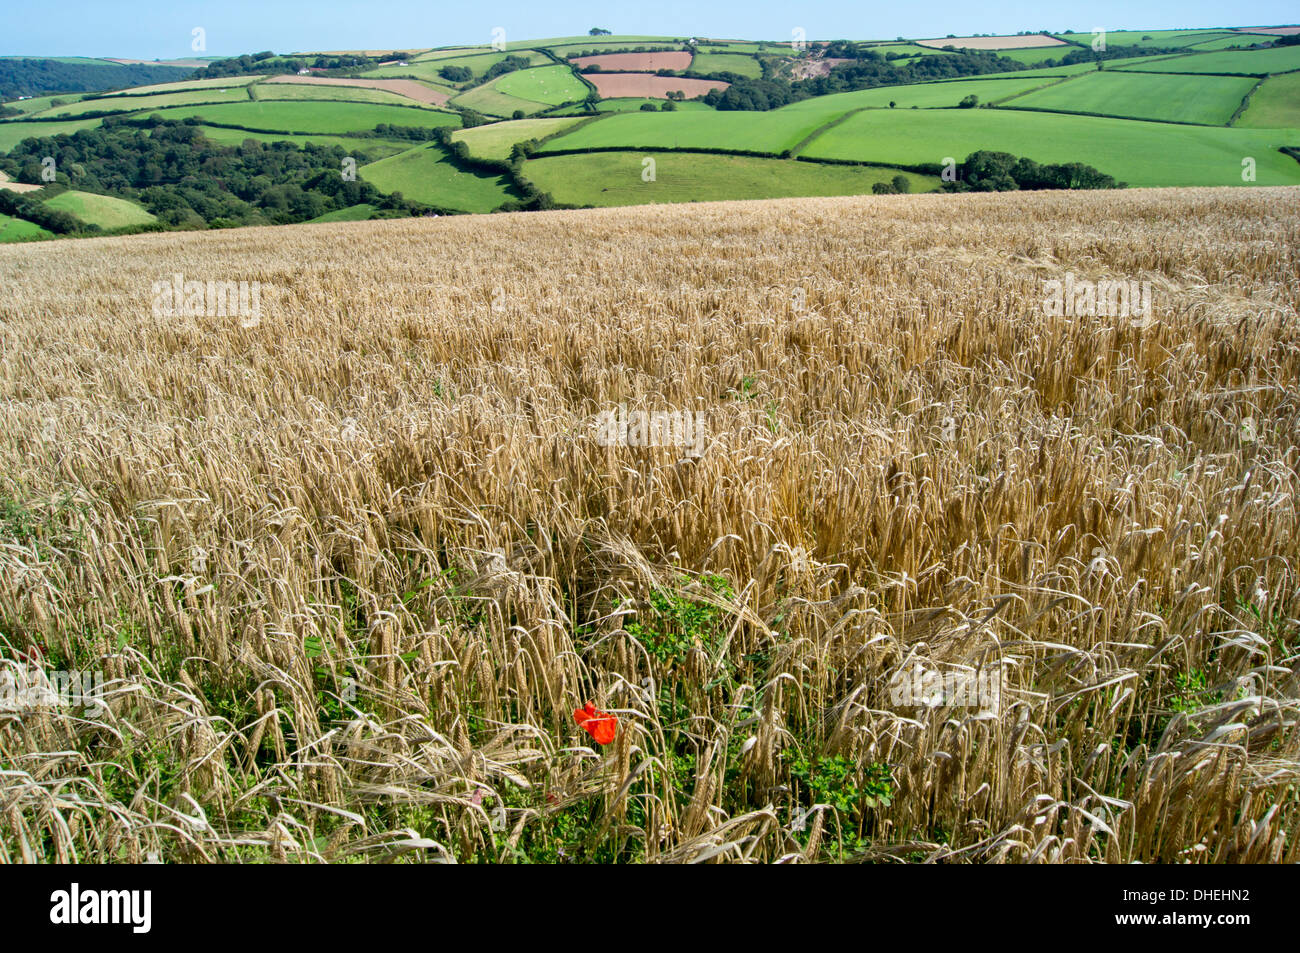 Poppies grow amongst barley in a River Dart valley agricultural landscape, Devon, England, United Kingdom, Europe Stock Photo